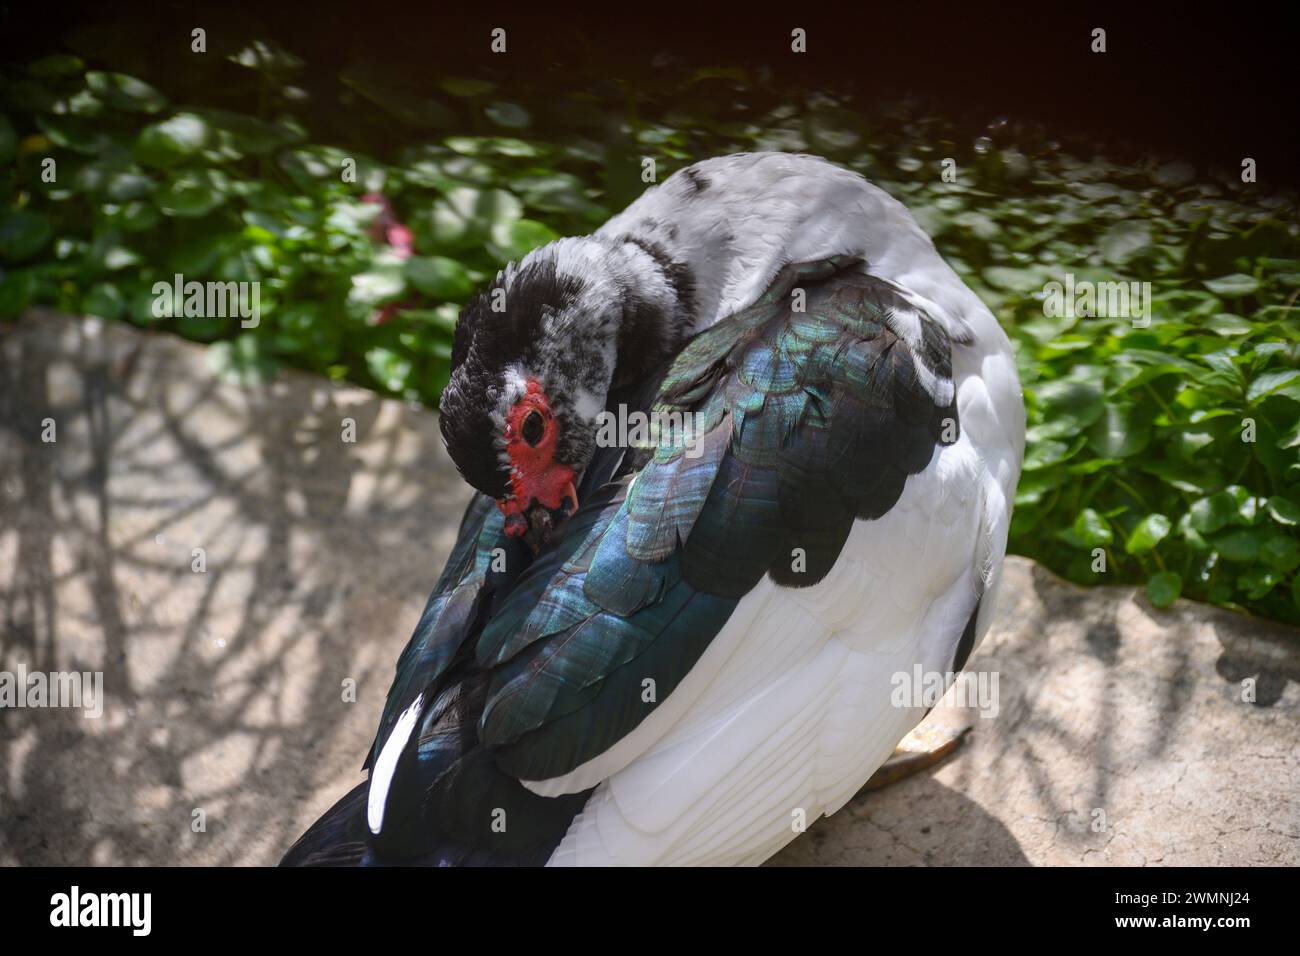 Muscovy duck (Cairina moschata) close up The Muscovy duck, also known as the Barbary duck, is a tropical duck that has been domesticated. It is reared Stock Photo